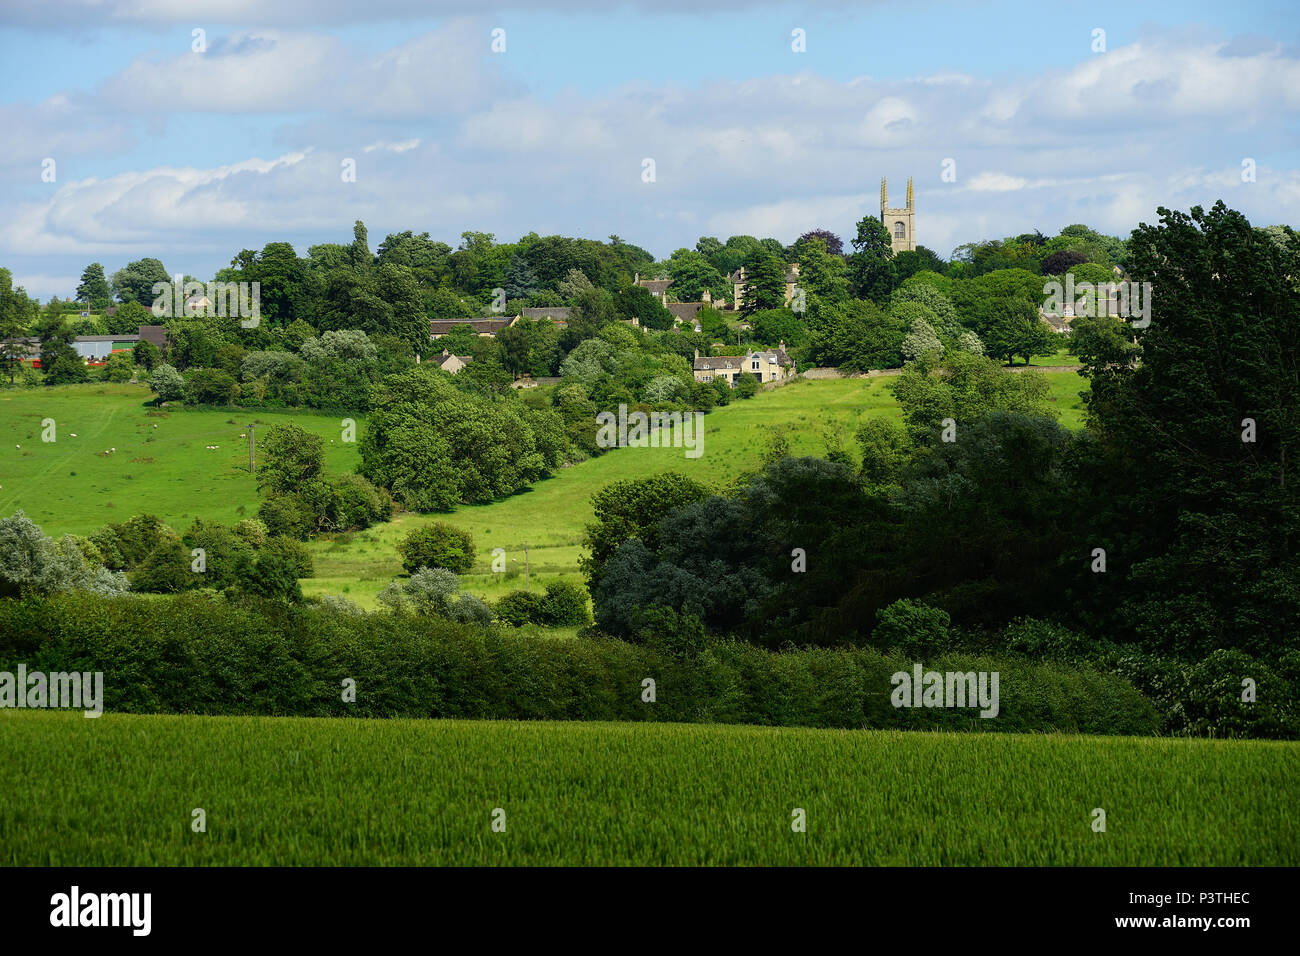 Collyweston village viewed from the Jurassic Way as it passes through the Welland Valley Stock Photo